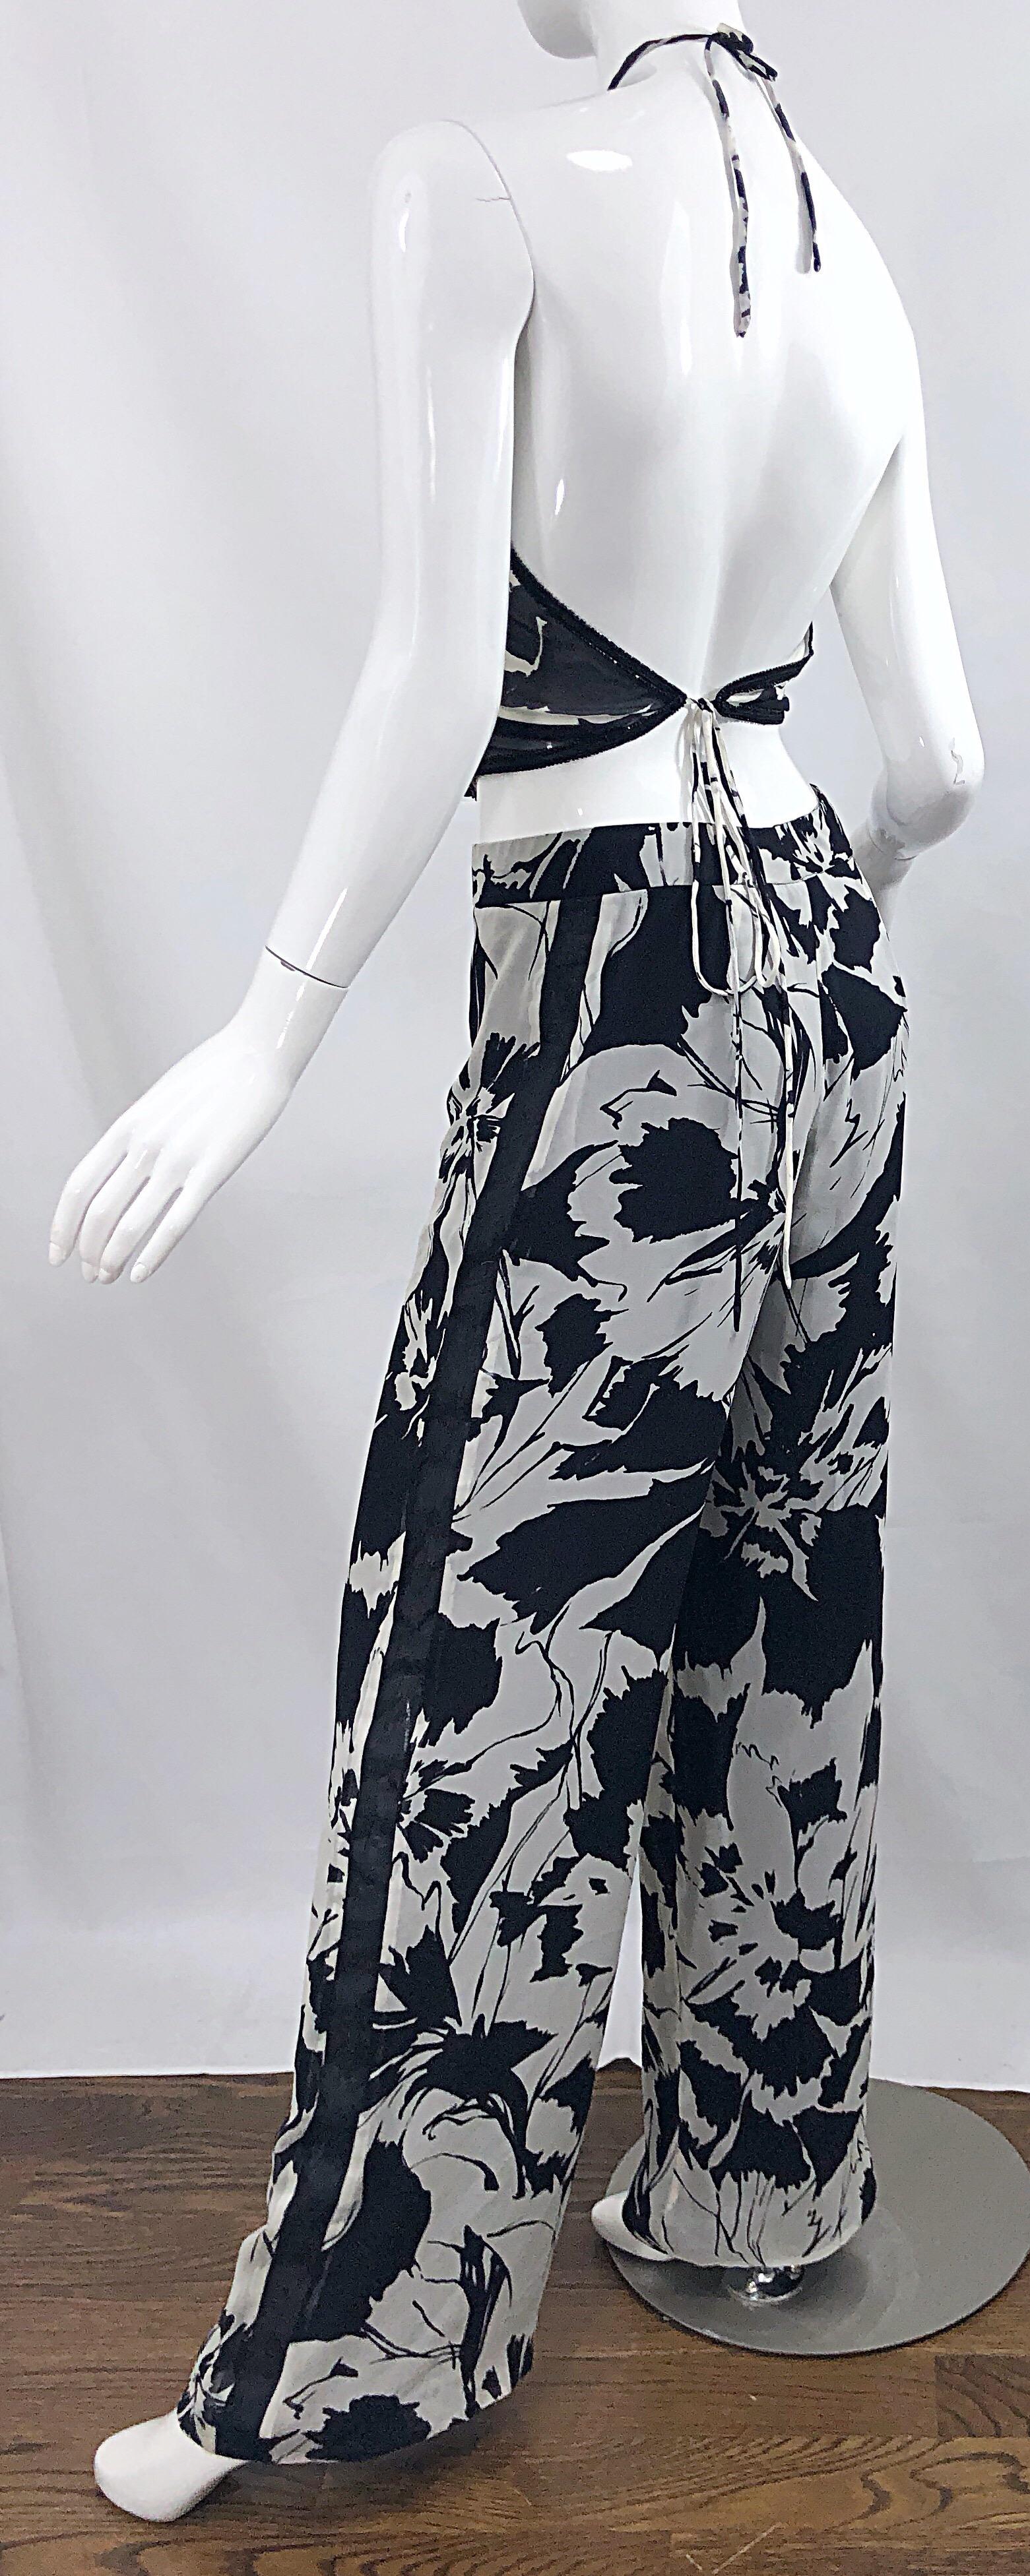 Vintage Gianfranco Ferre Black and White Sheer Chiffon Beaded 90s Wide ...